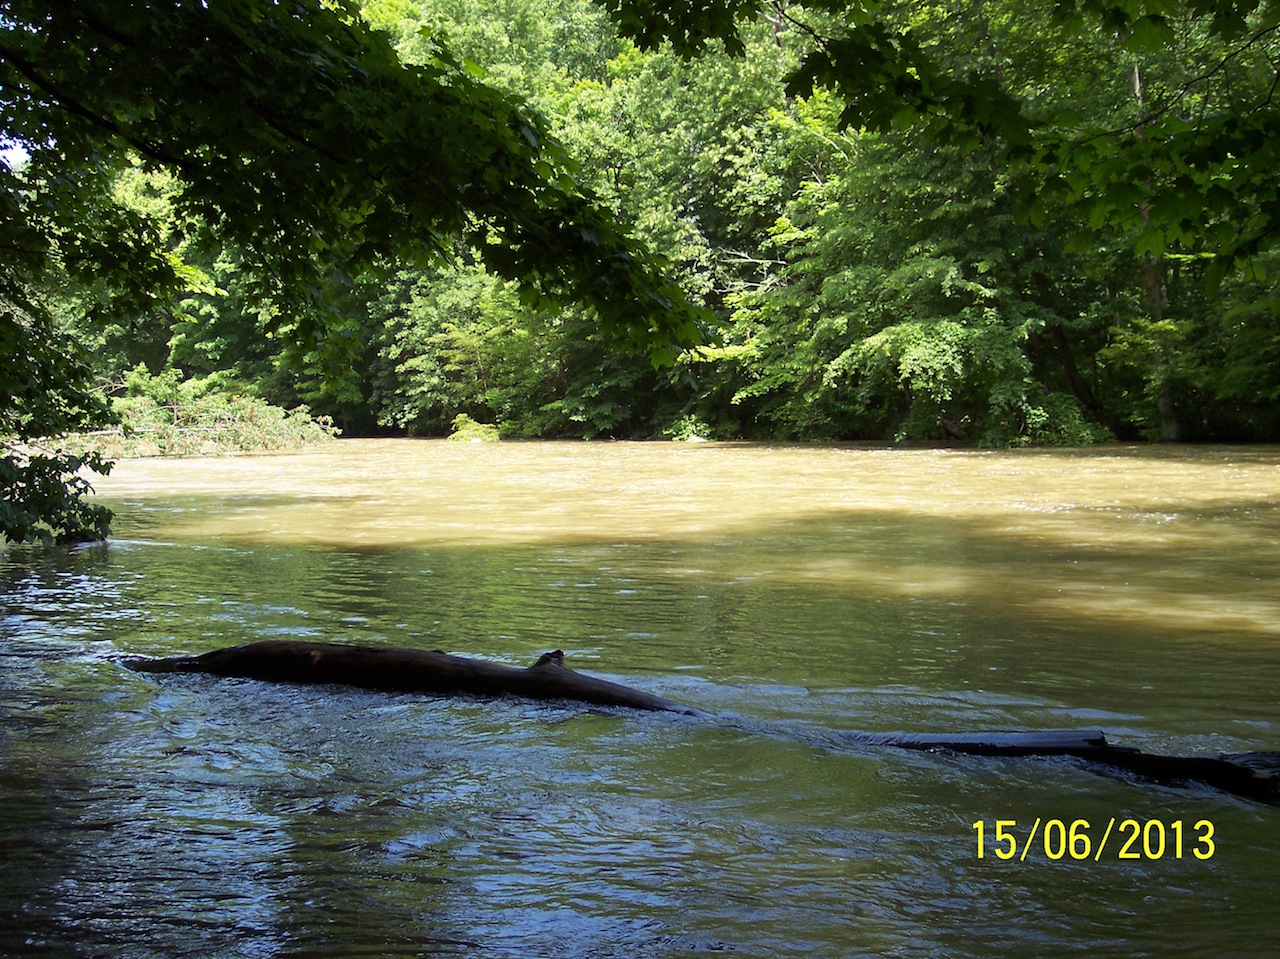 Mohican 2 - Swollen Clear Fork River